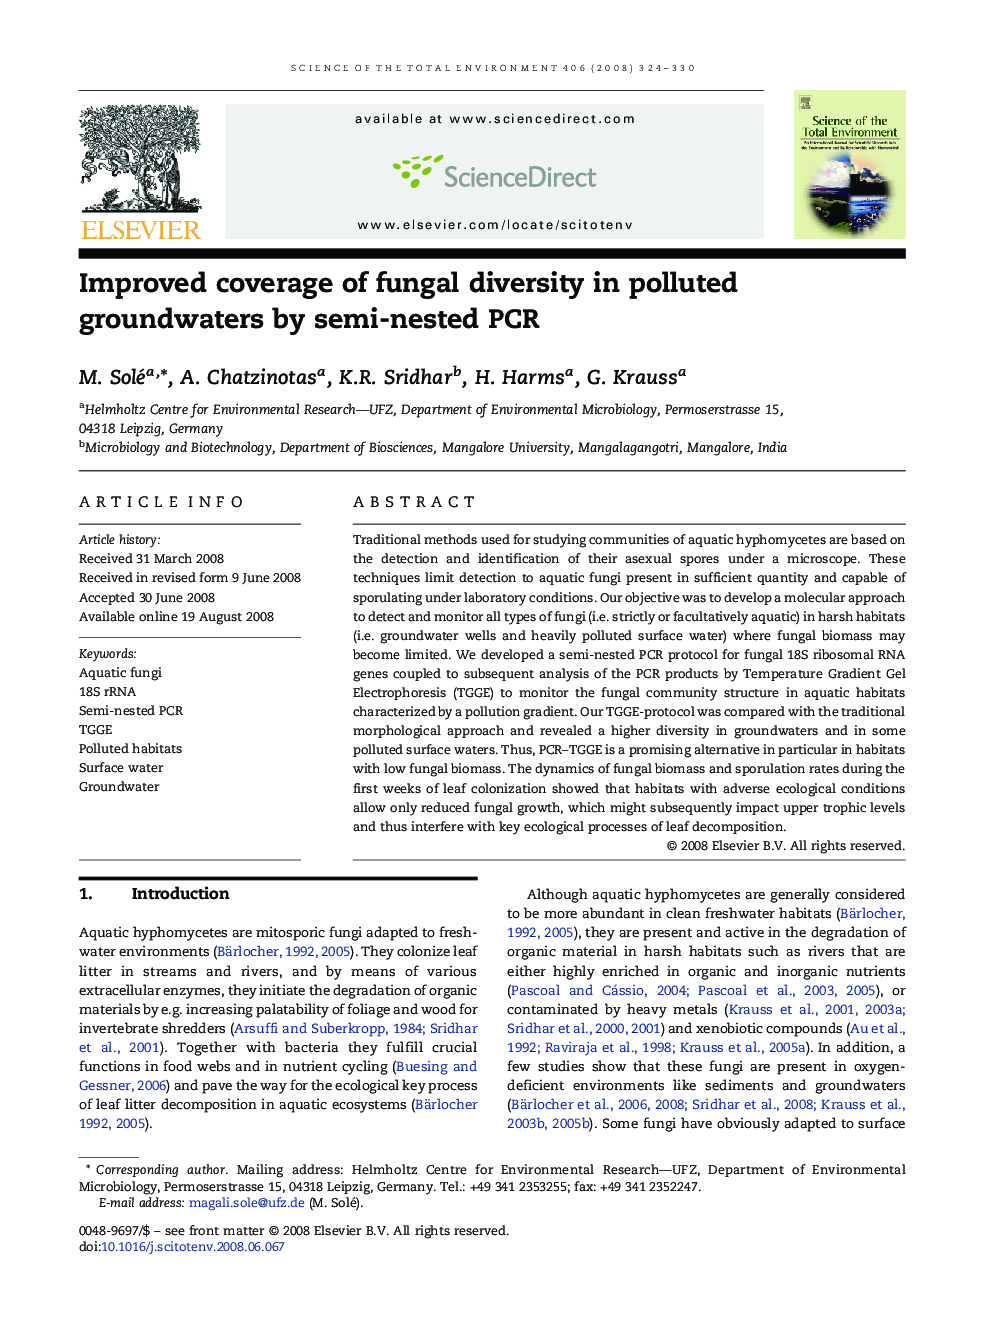 Improved coverage of fungal diversity in polluted groundwaters by semi-nested PCR